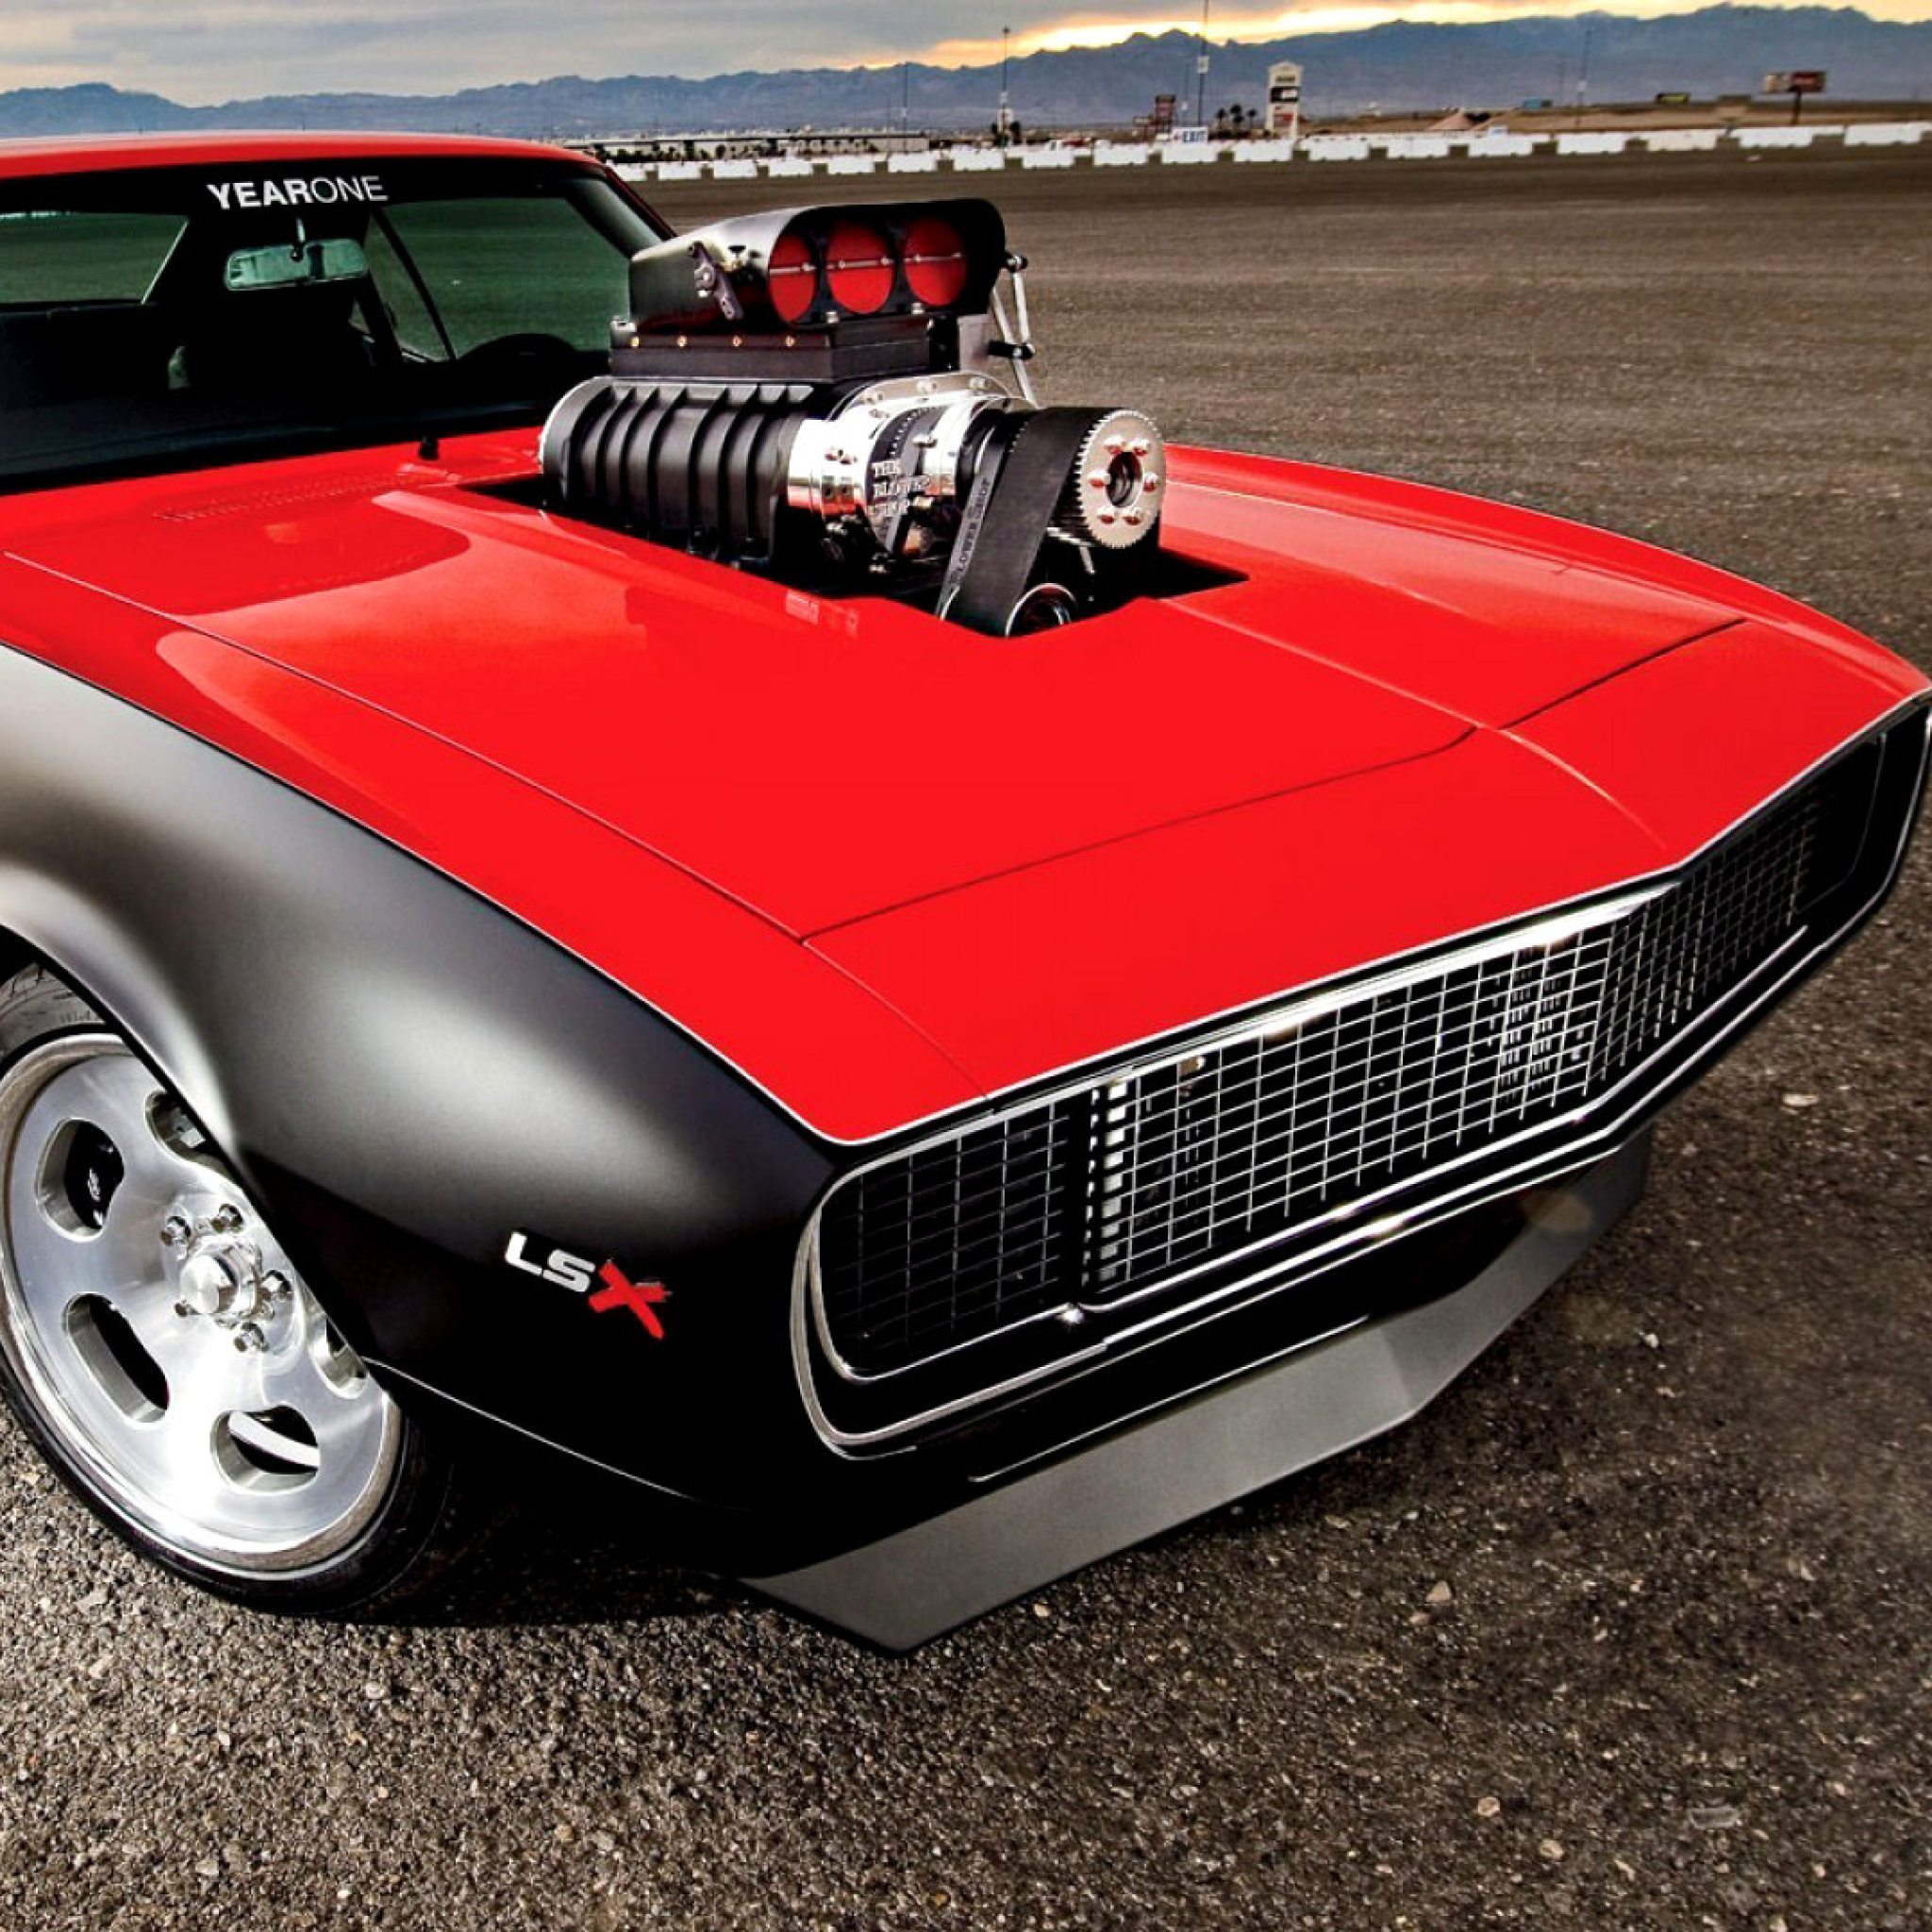 Chevrolet Hot Rod Muscle Car with GM Engine wallpaper 2048x2048